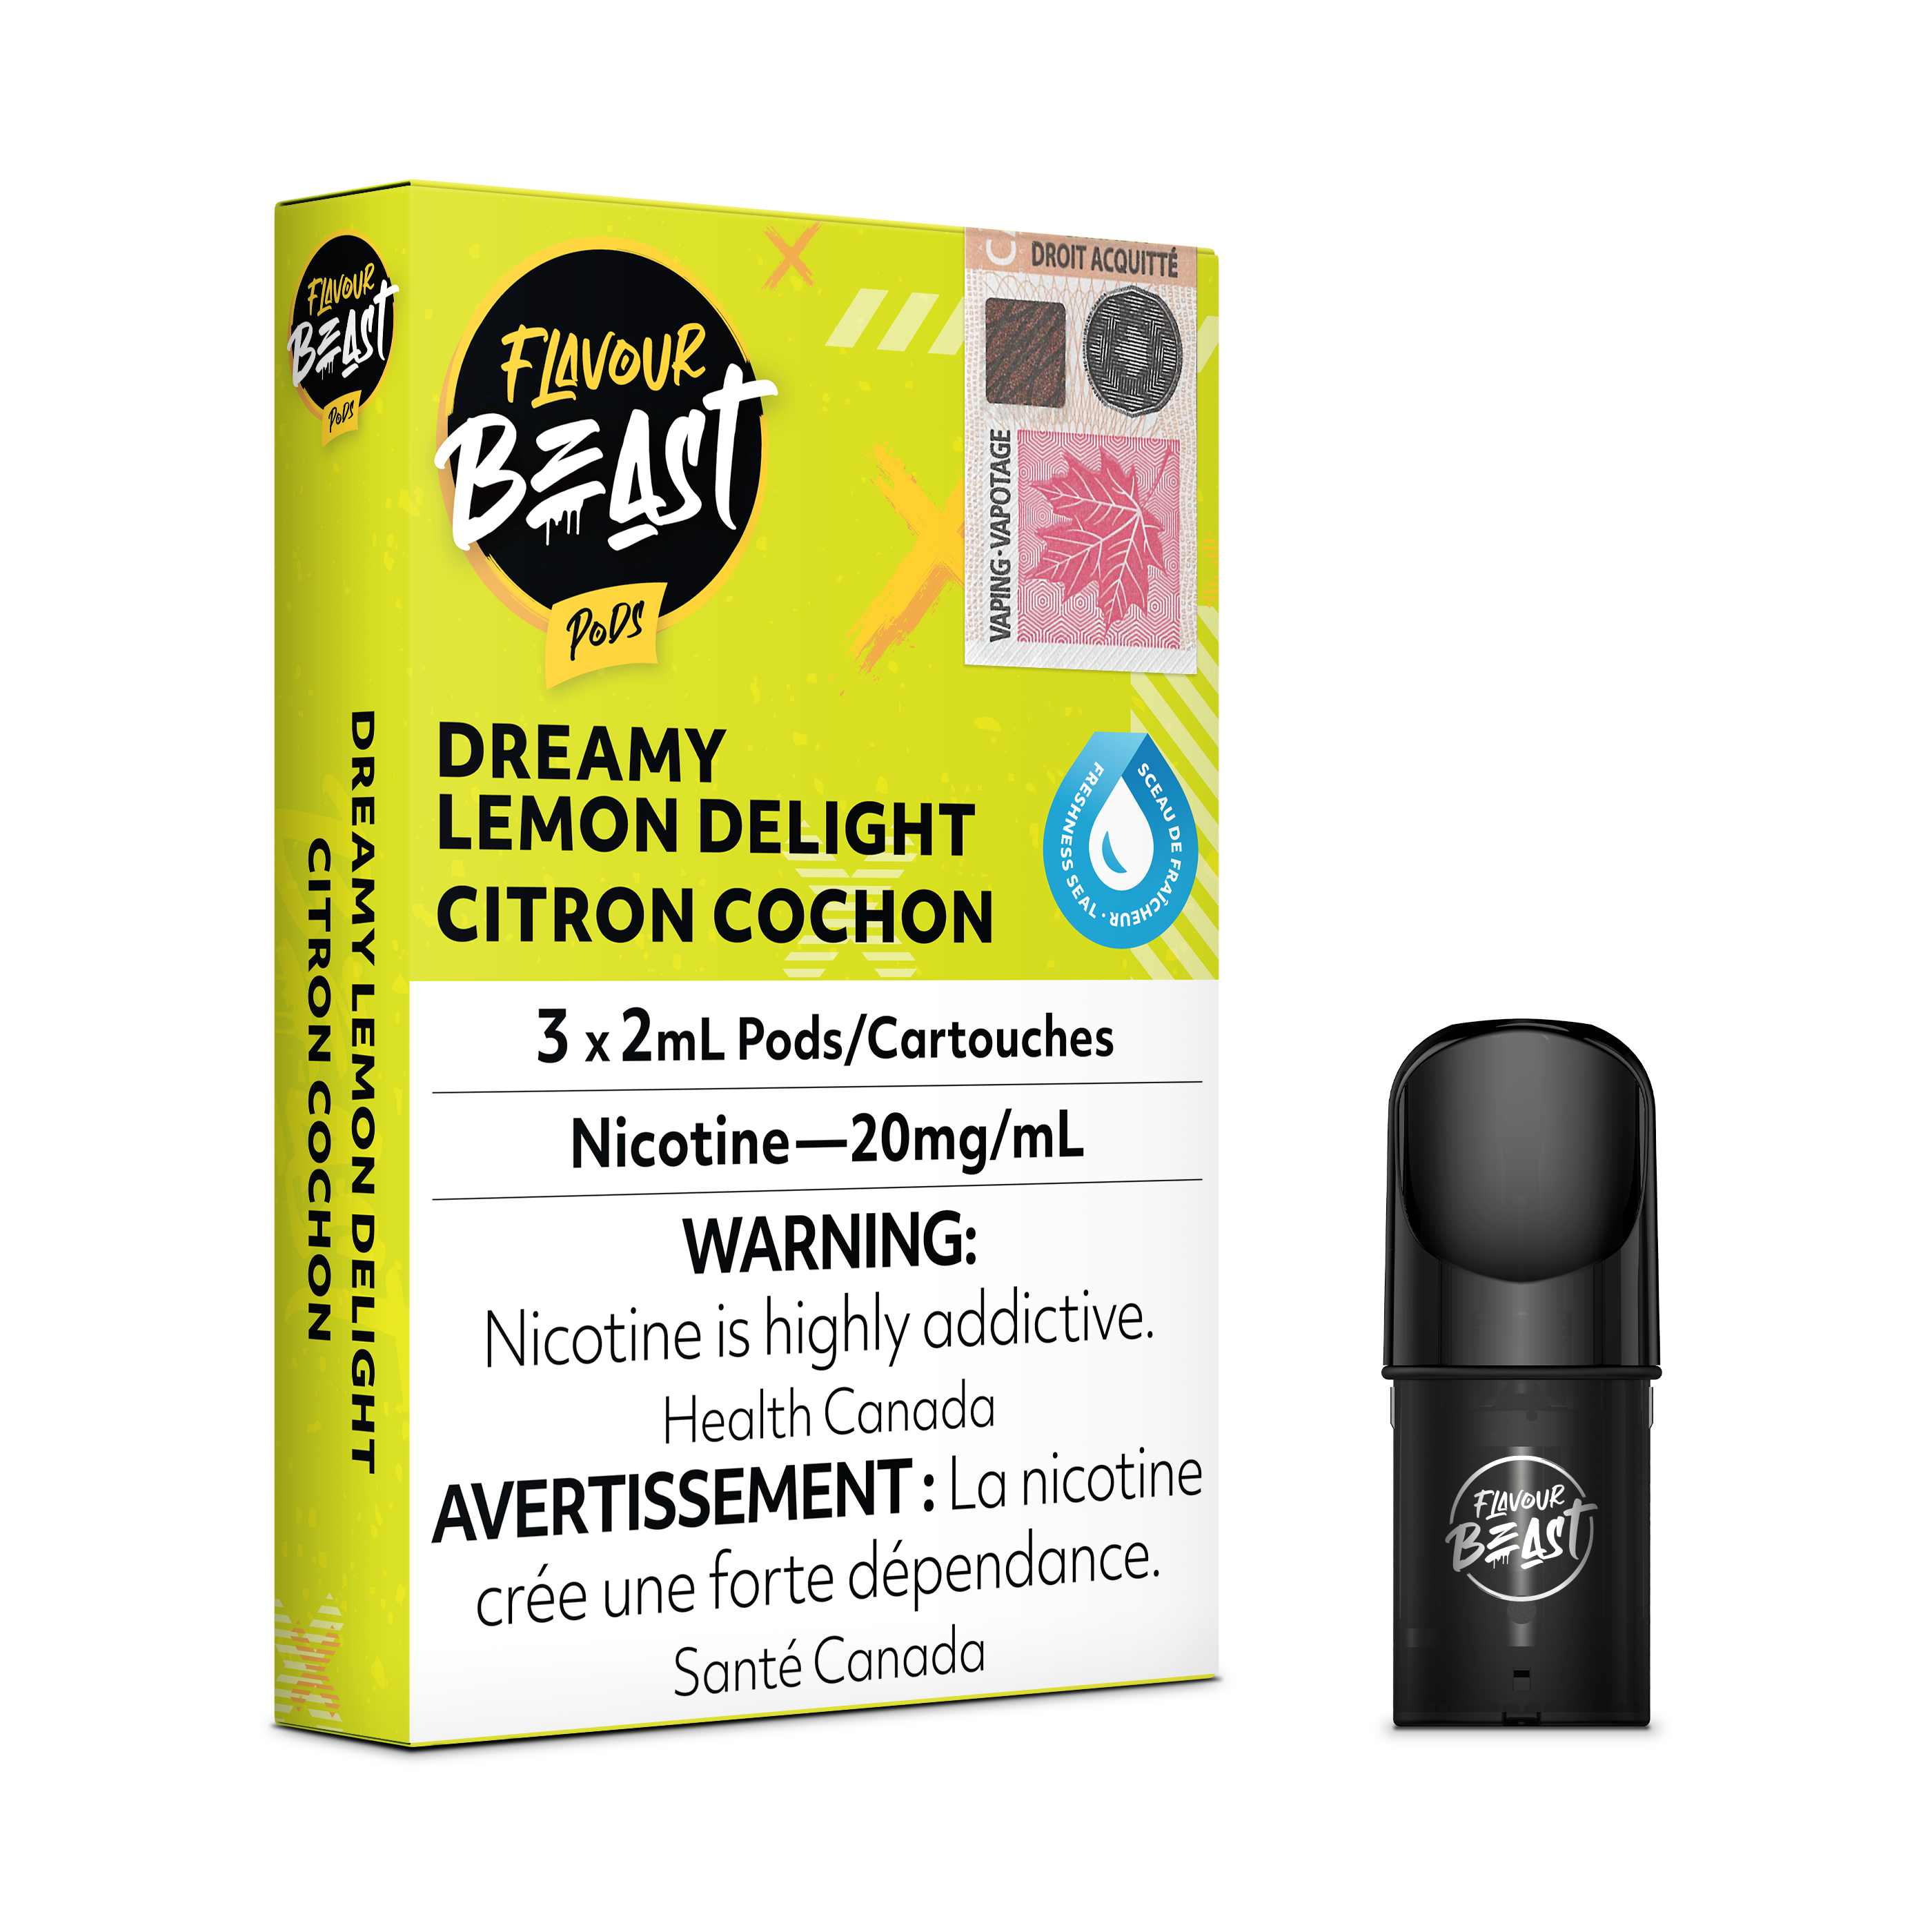 Dreamy Lemon Delight - Flavour Beast Pod Pack - 20mg - EXCISED